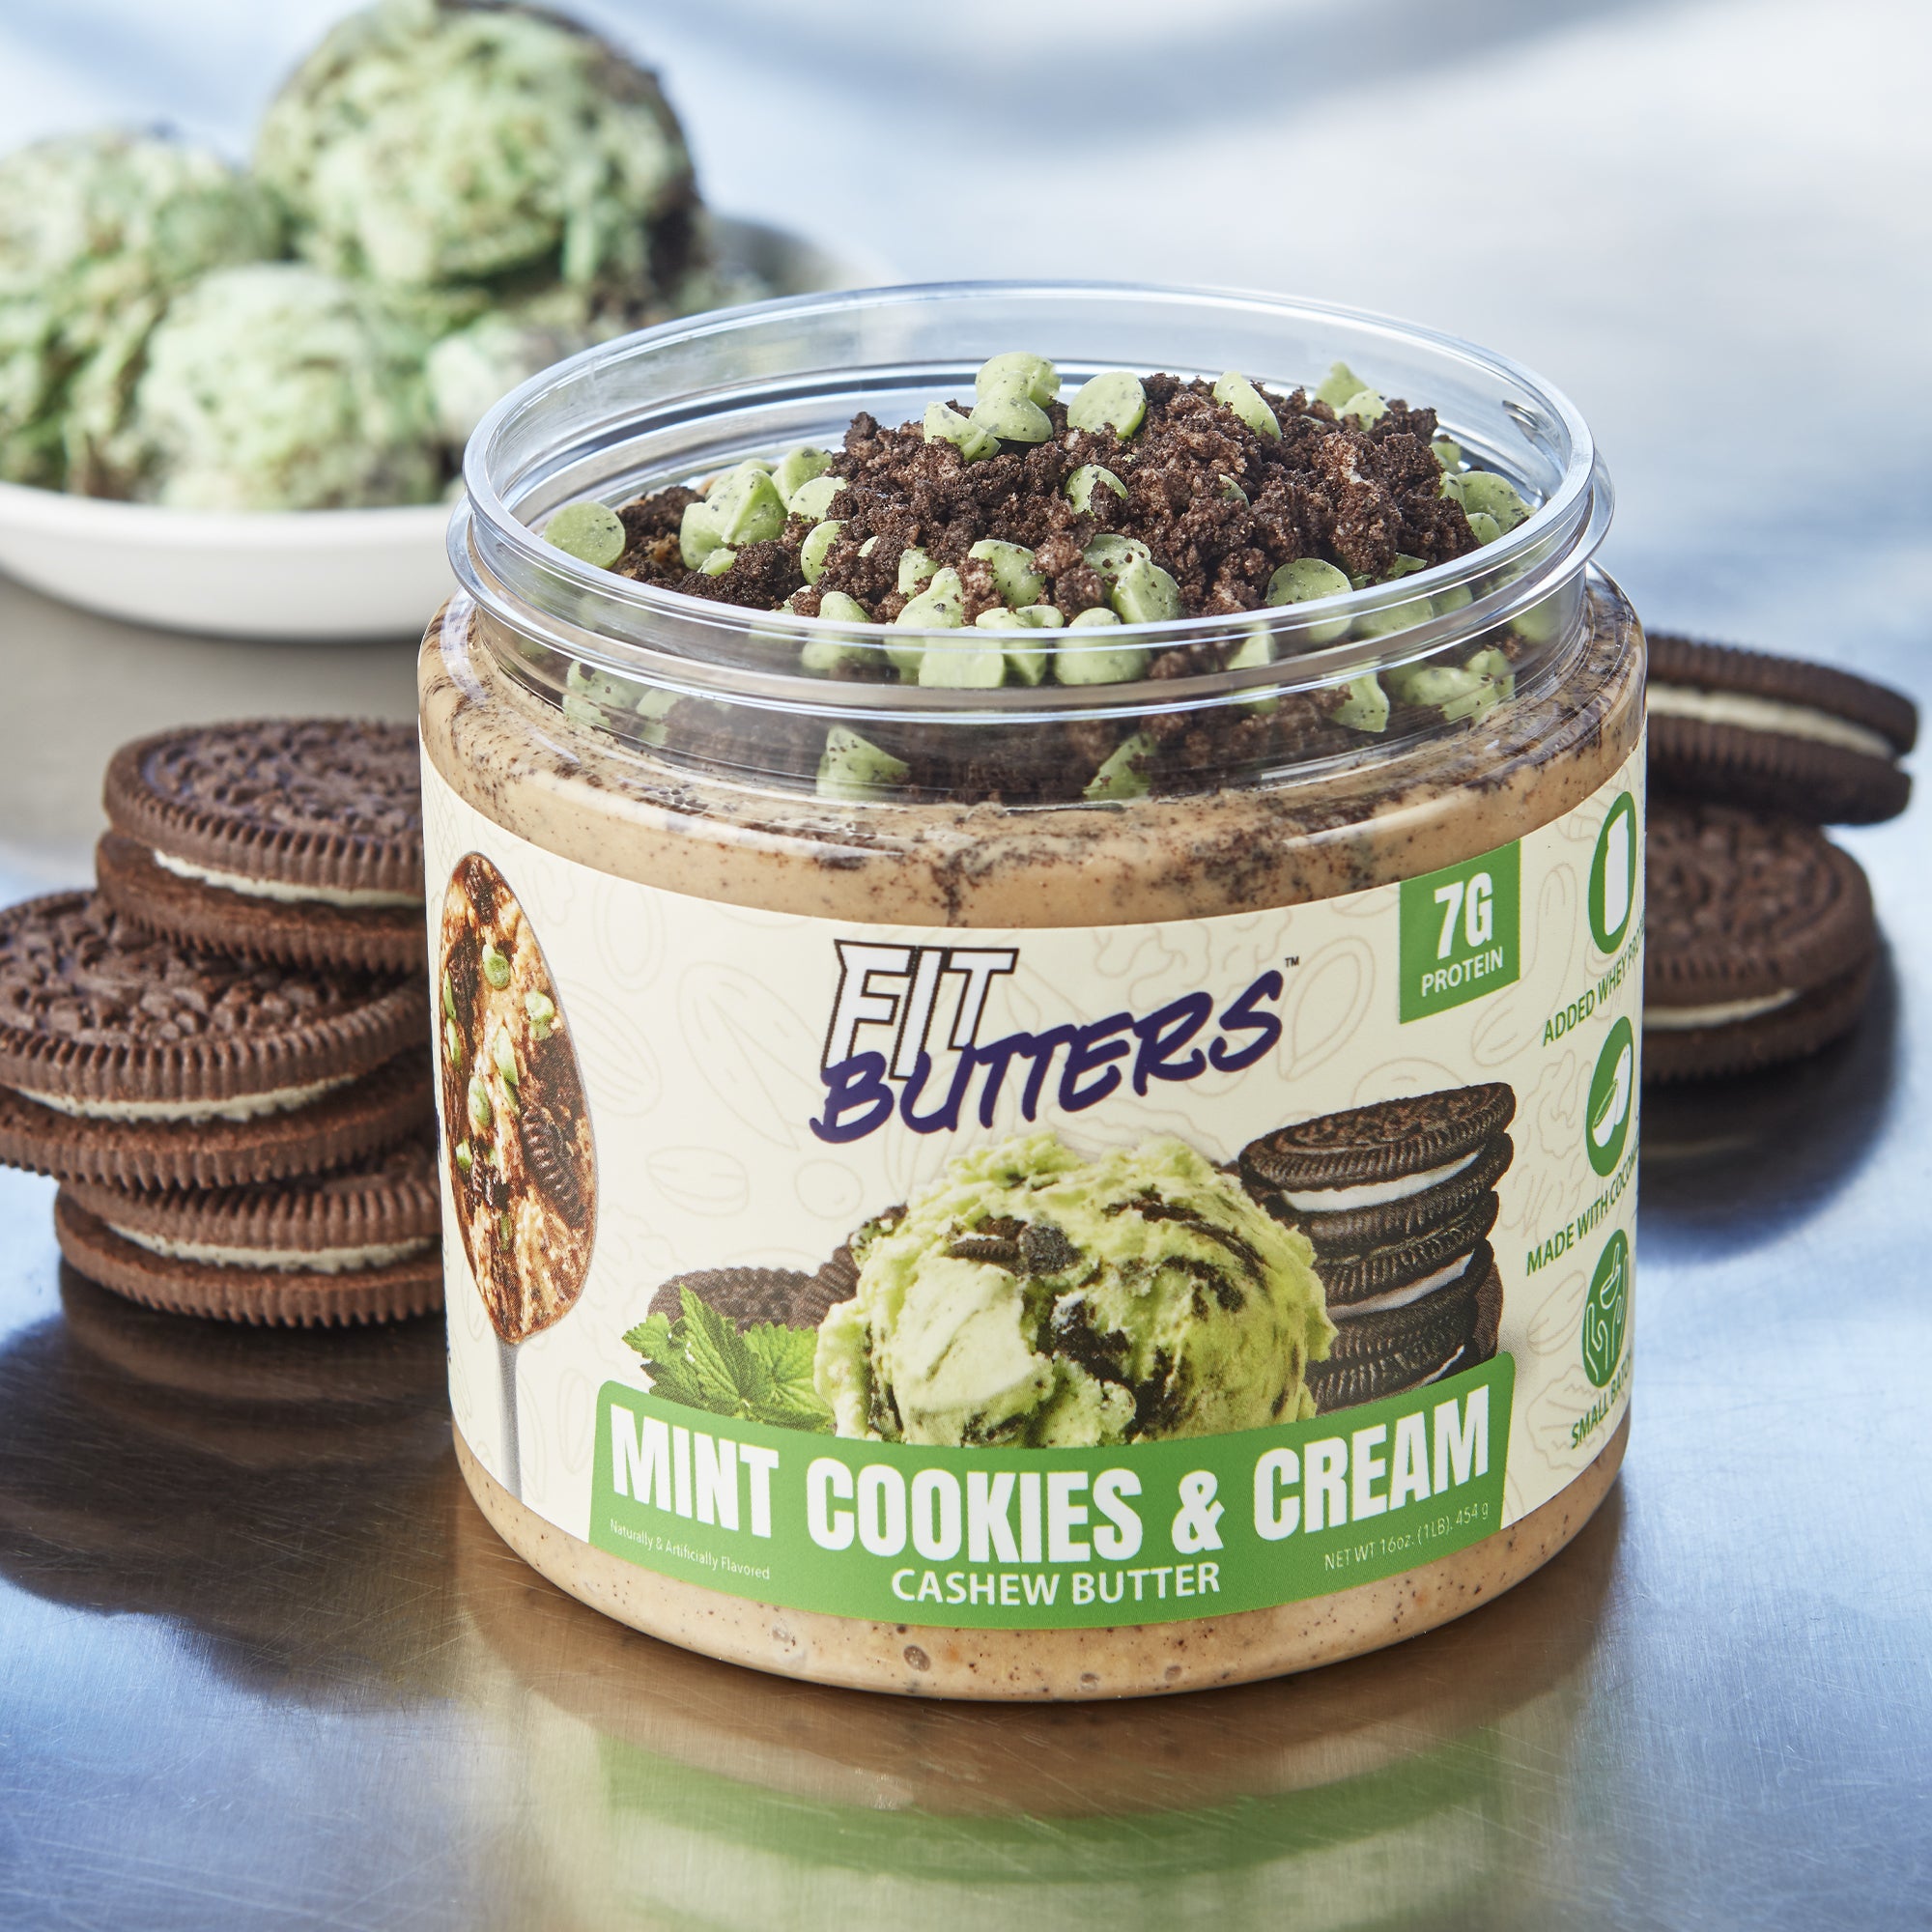 Fit Butters Mint Cookies & Cream